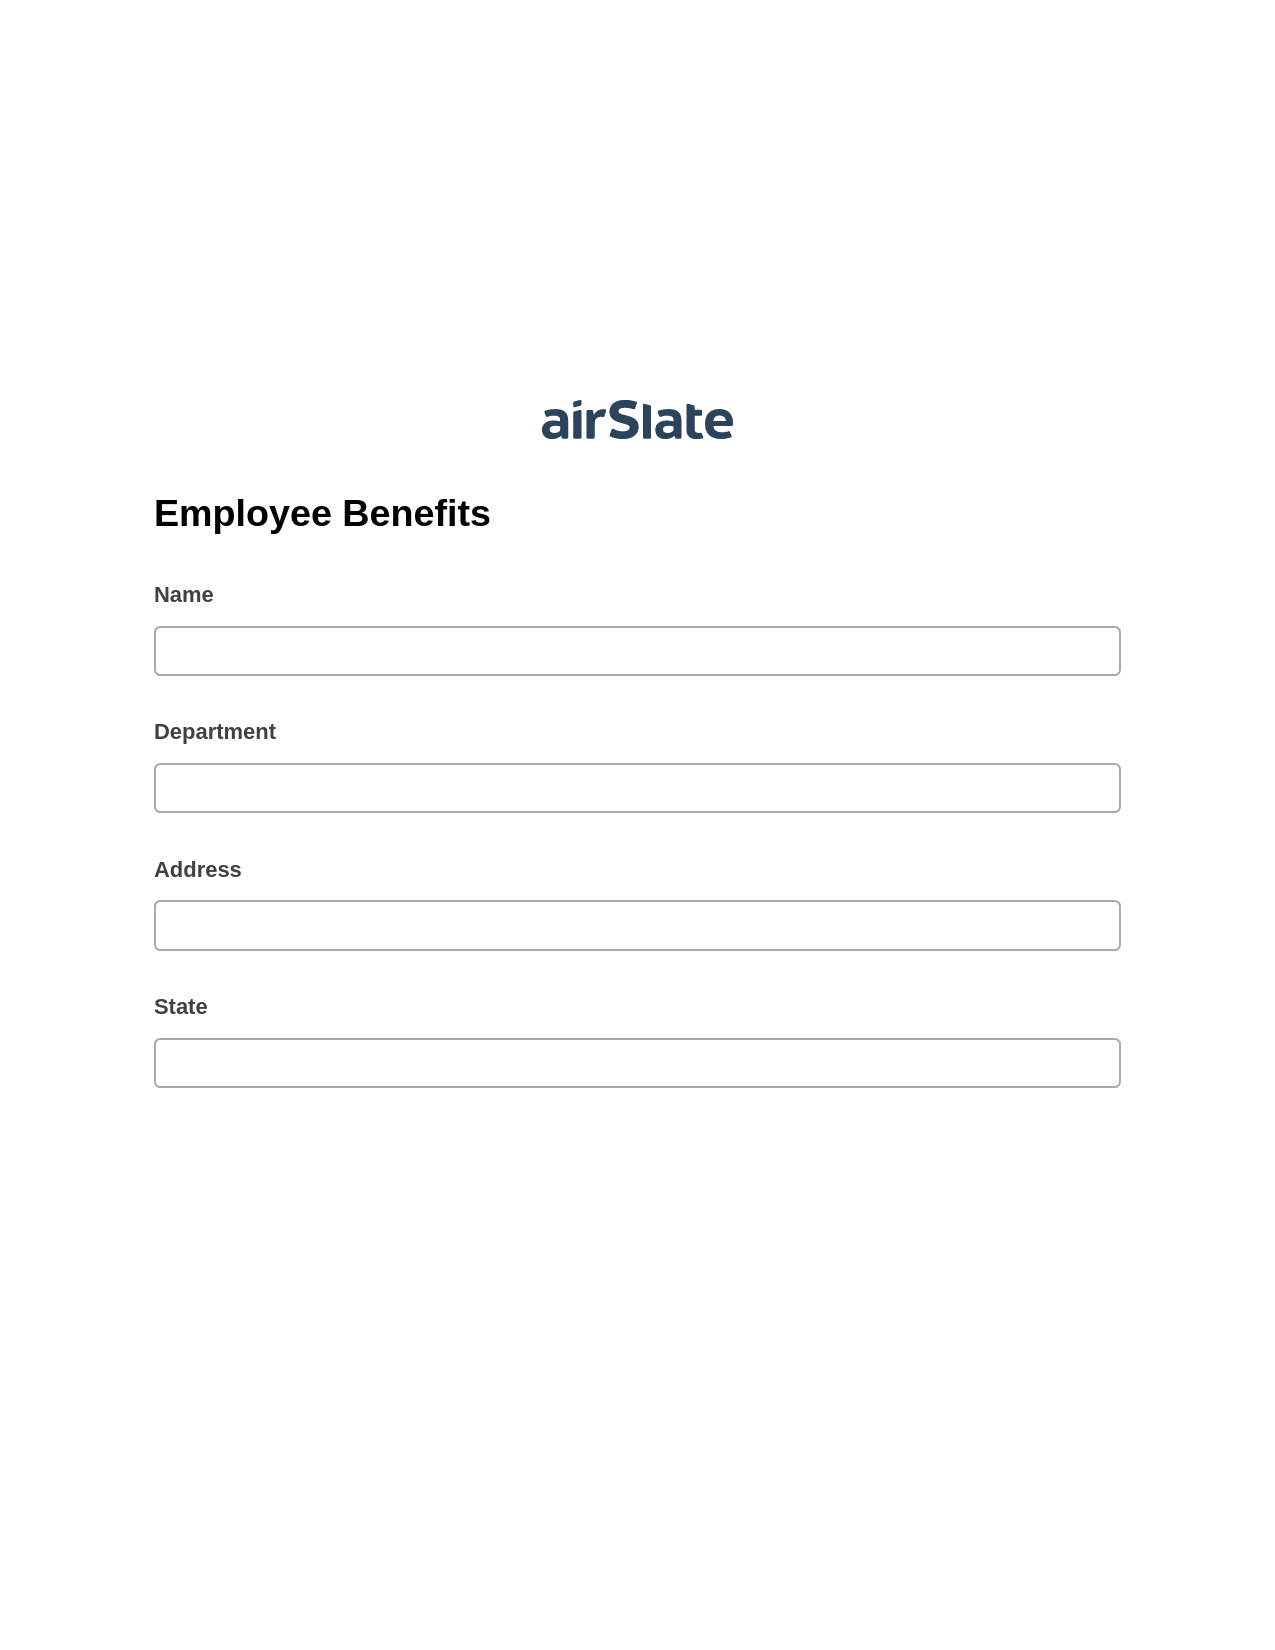 Employee Benefits Pre-fill from Salesforce Records with SOQL Bot, Set Signature Type Bot, Export to Excel 365 Bot